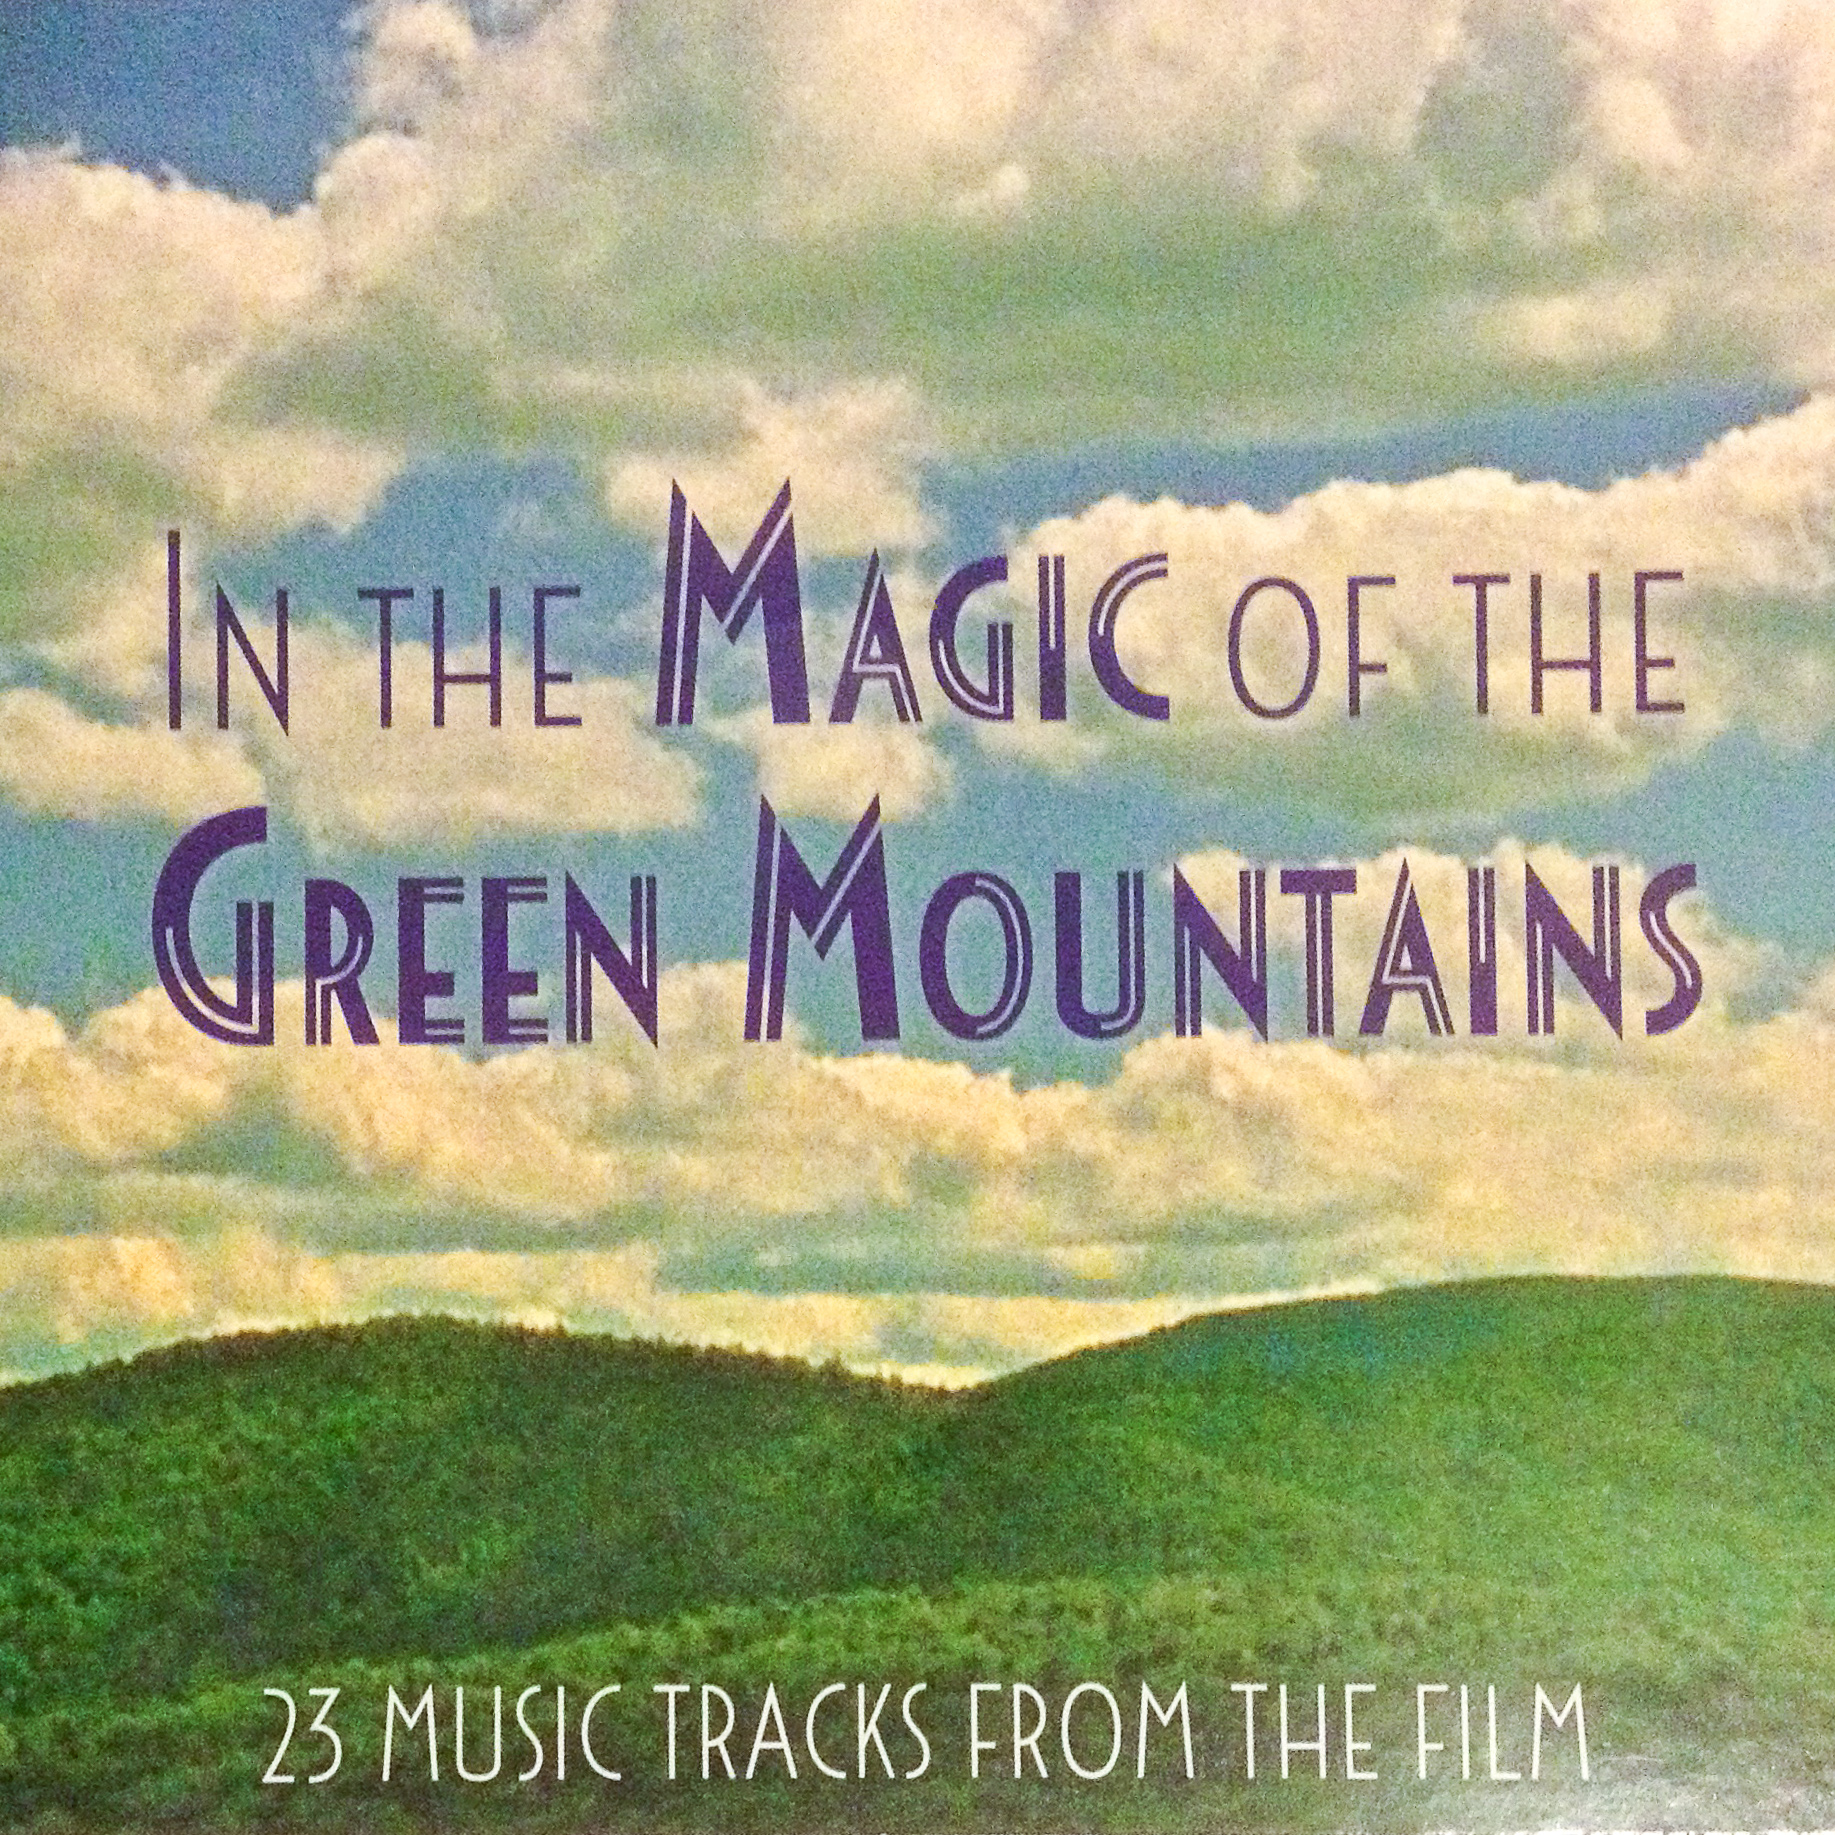 music from "In the Magic of the Green Mountains"